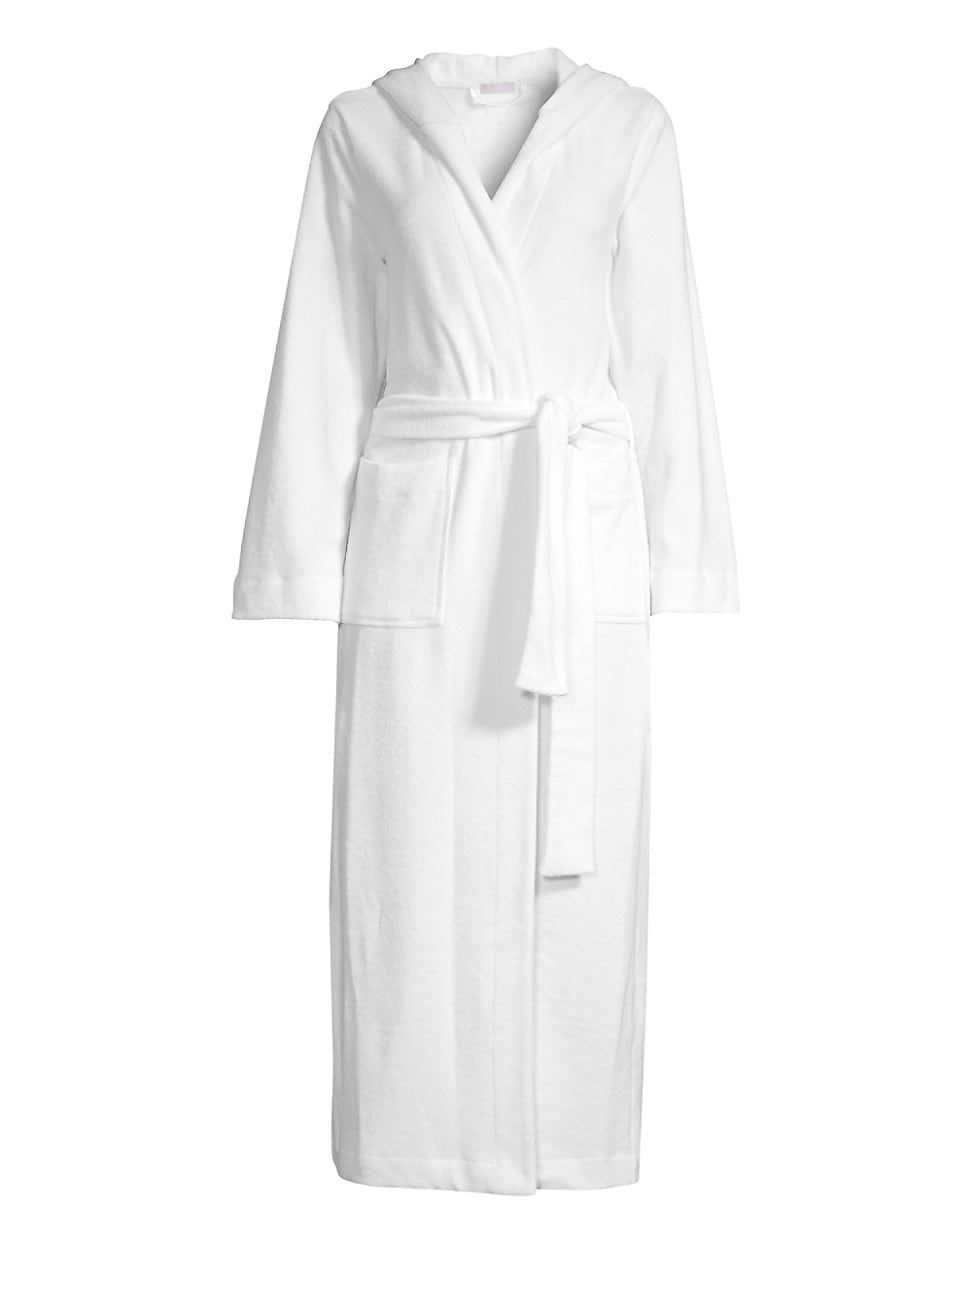 Hanro Women's Terry Long Hooded Robe - White - Size XL | Saks Fifth Avenue